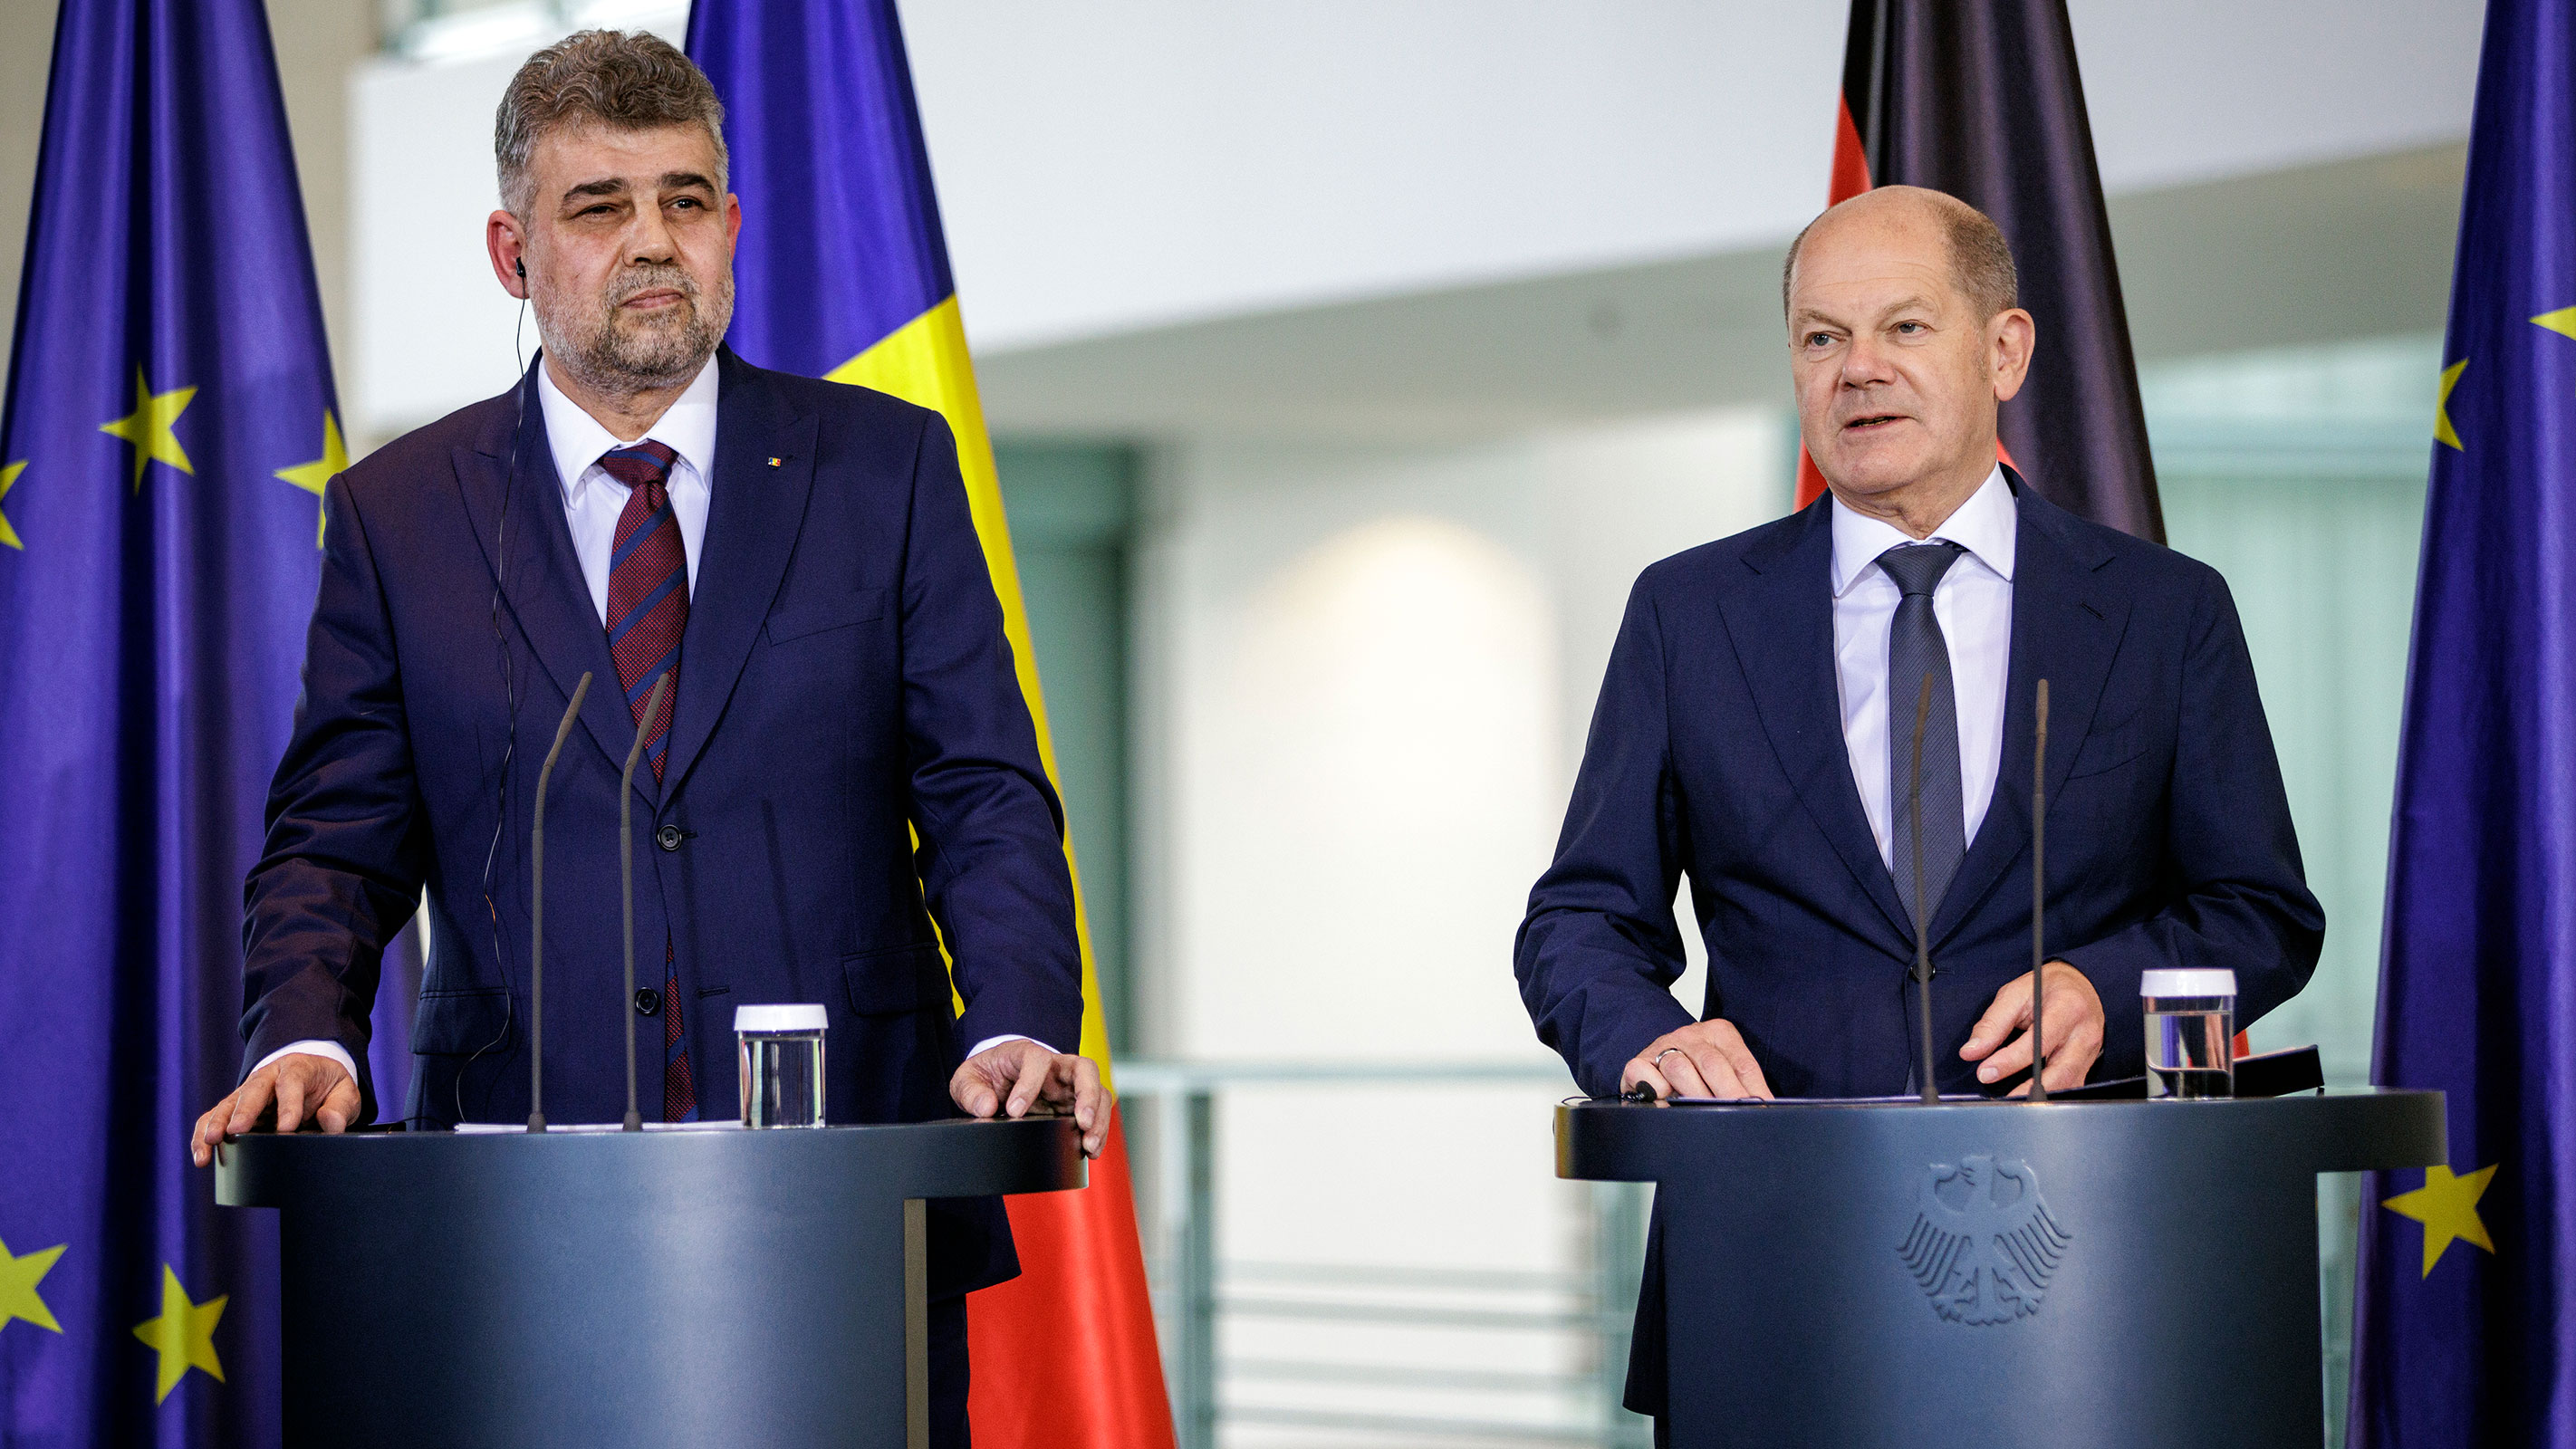 Romanian Prime Minister Ion Marcel Ciolacu and German Chancellor Olaf Scholz during a press conference  on July 4, in Berlin, Germany.